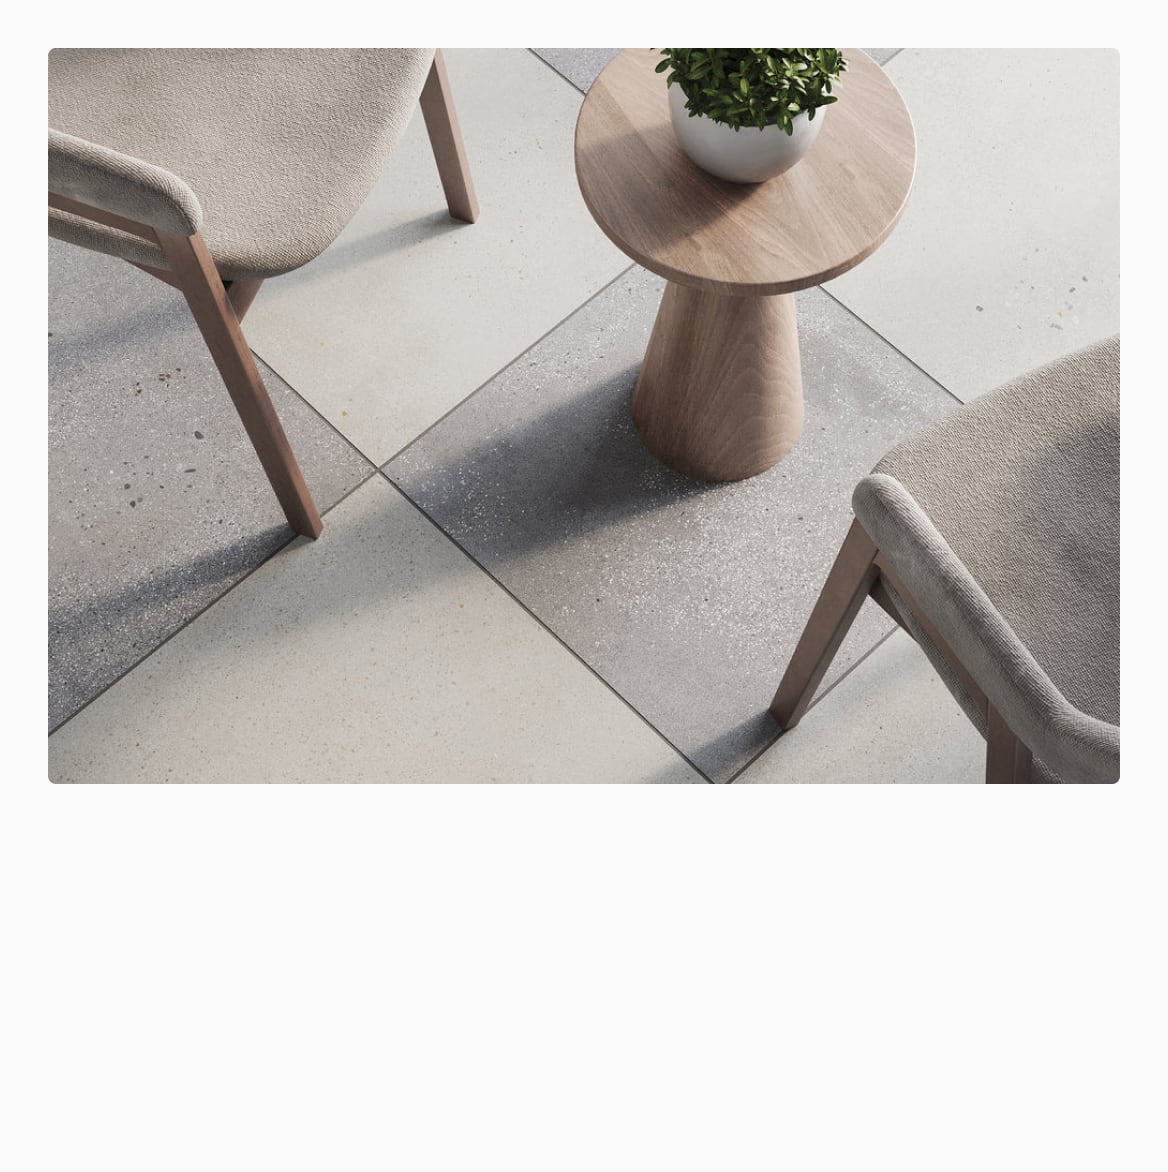 24x24 Terrazzo Look Porcelain Tiles adding a modern and luxurious touch to chic living spaces.